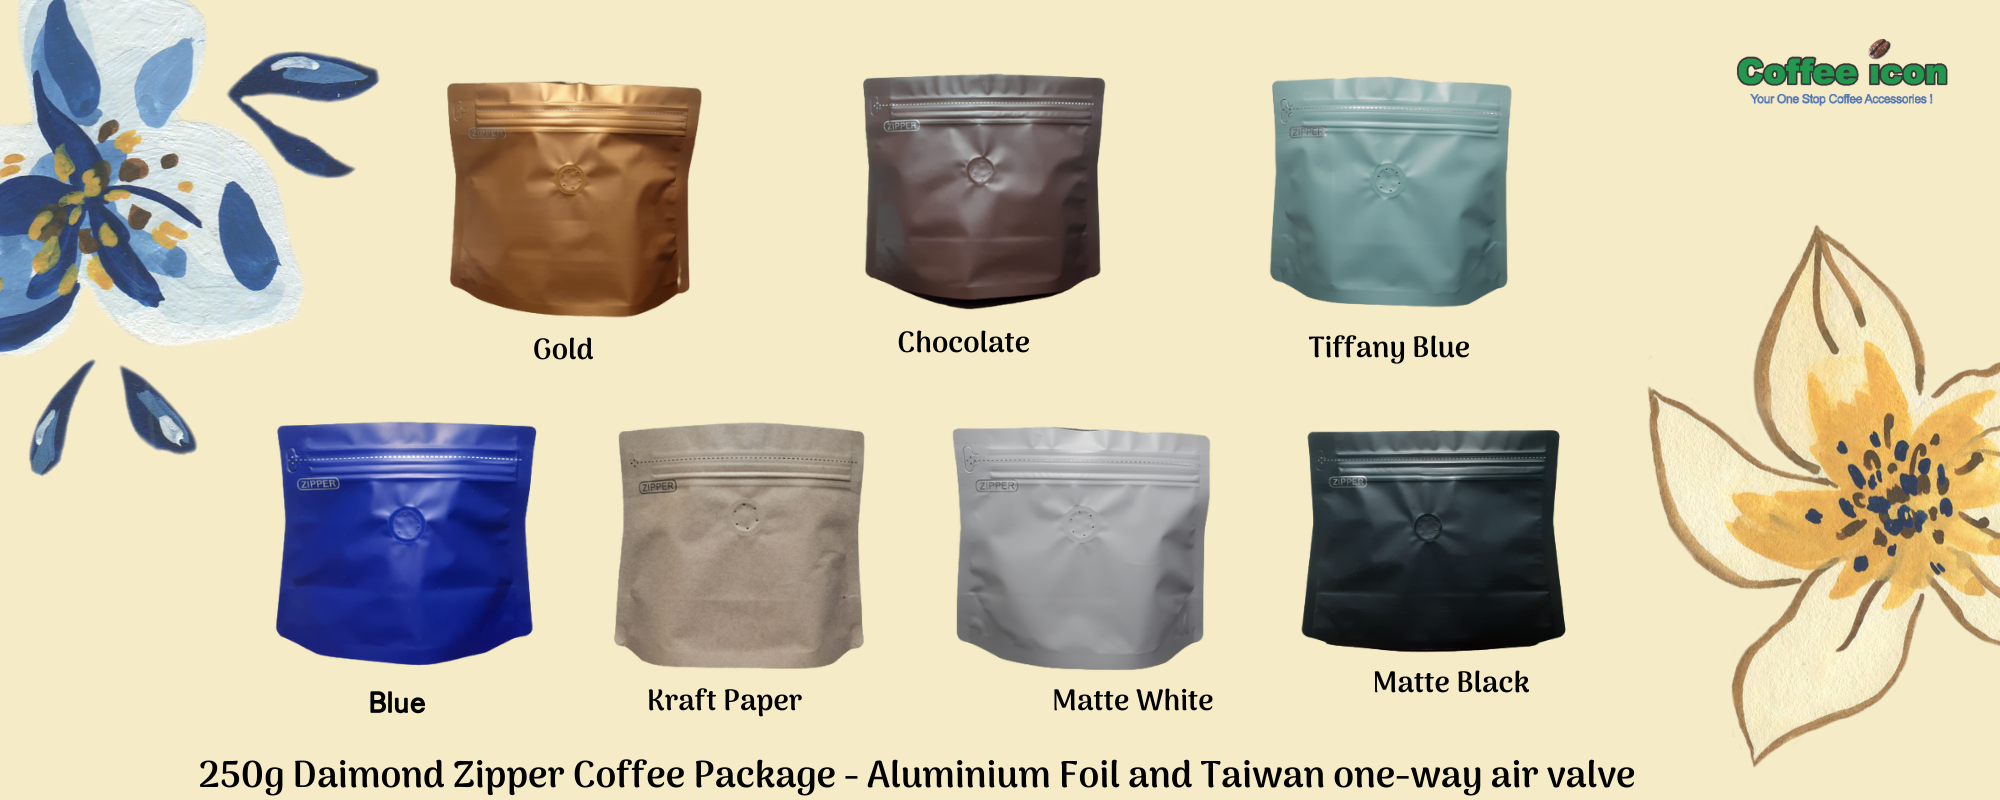 250g Daimond Zipper Coffee Package - Aluminium Foil and Taiwan one-way air valve.png